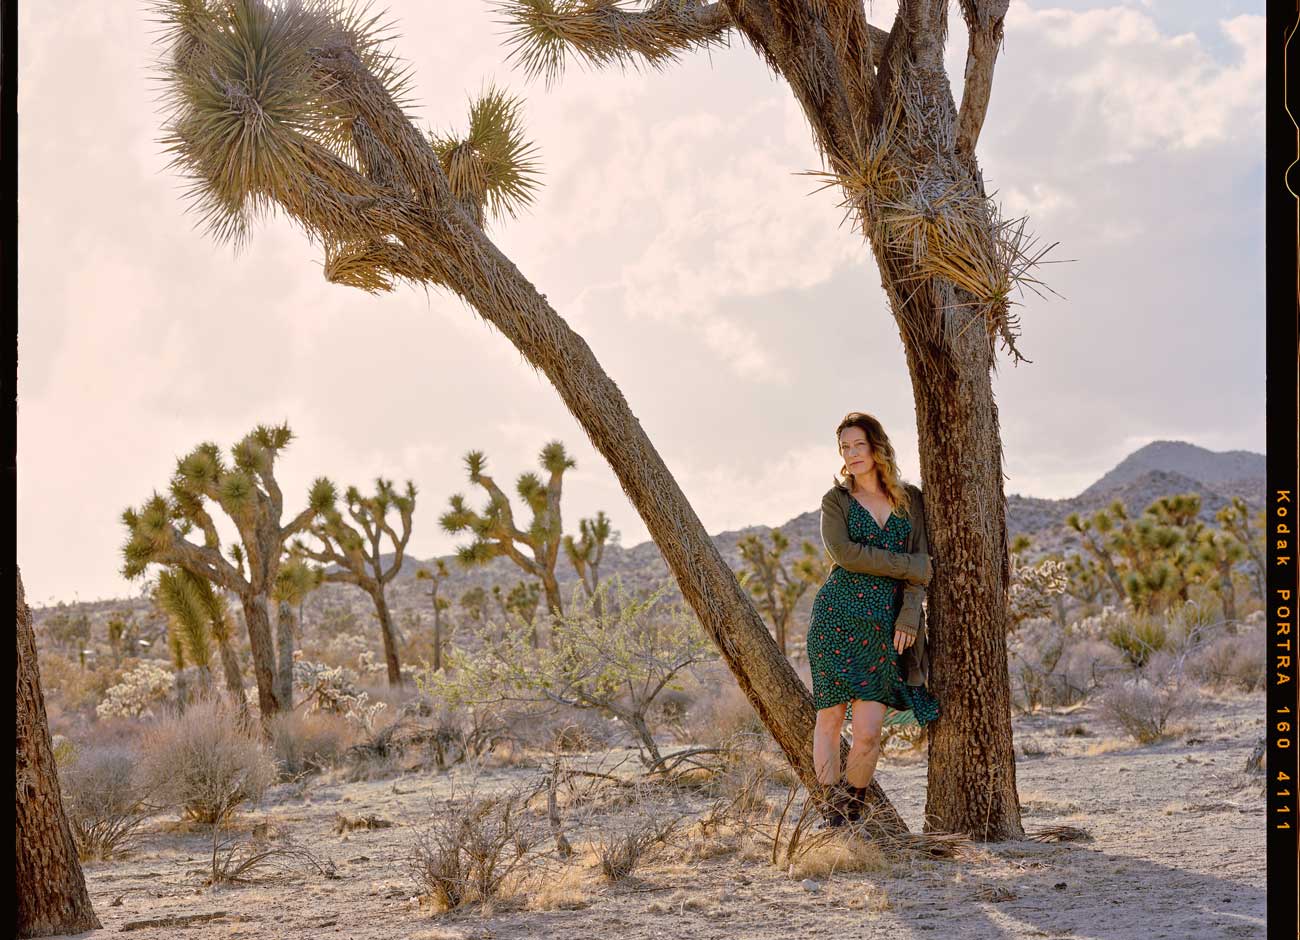 a woman in a windblown green dress and sweater leans against a Joshua tree in the desert. The sky is a pale pink color.